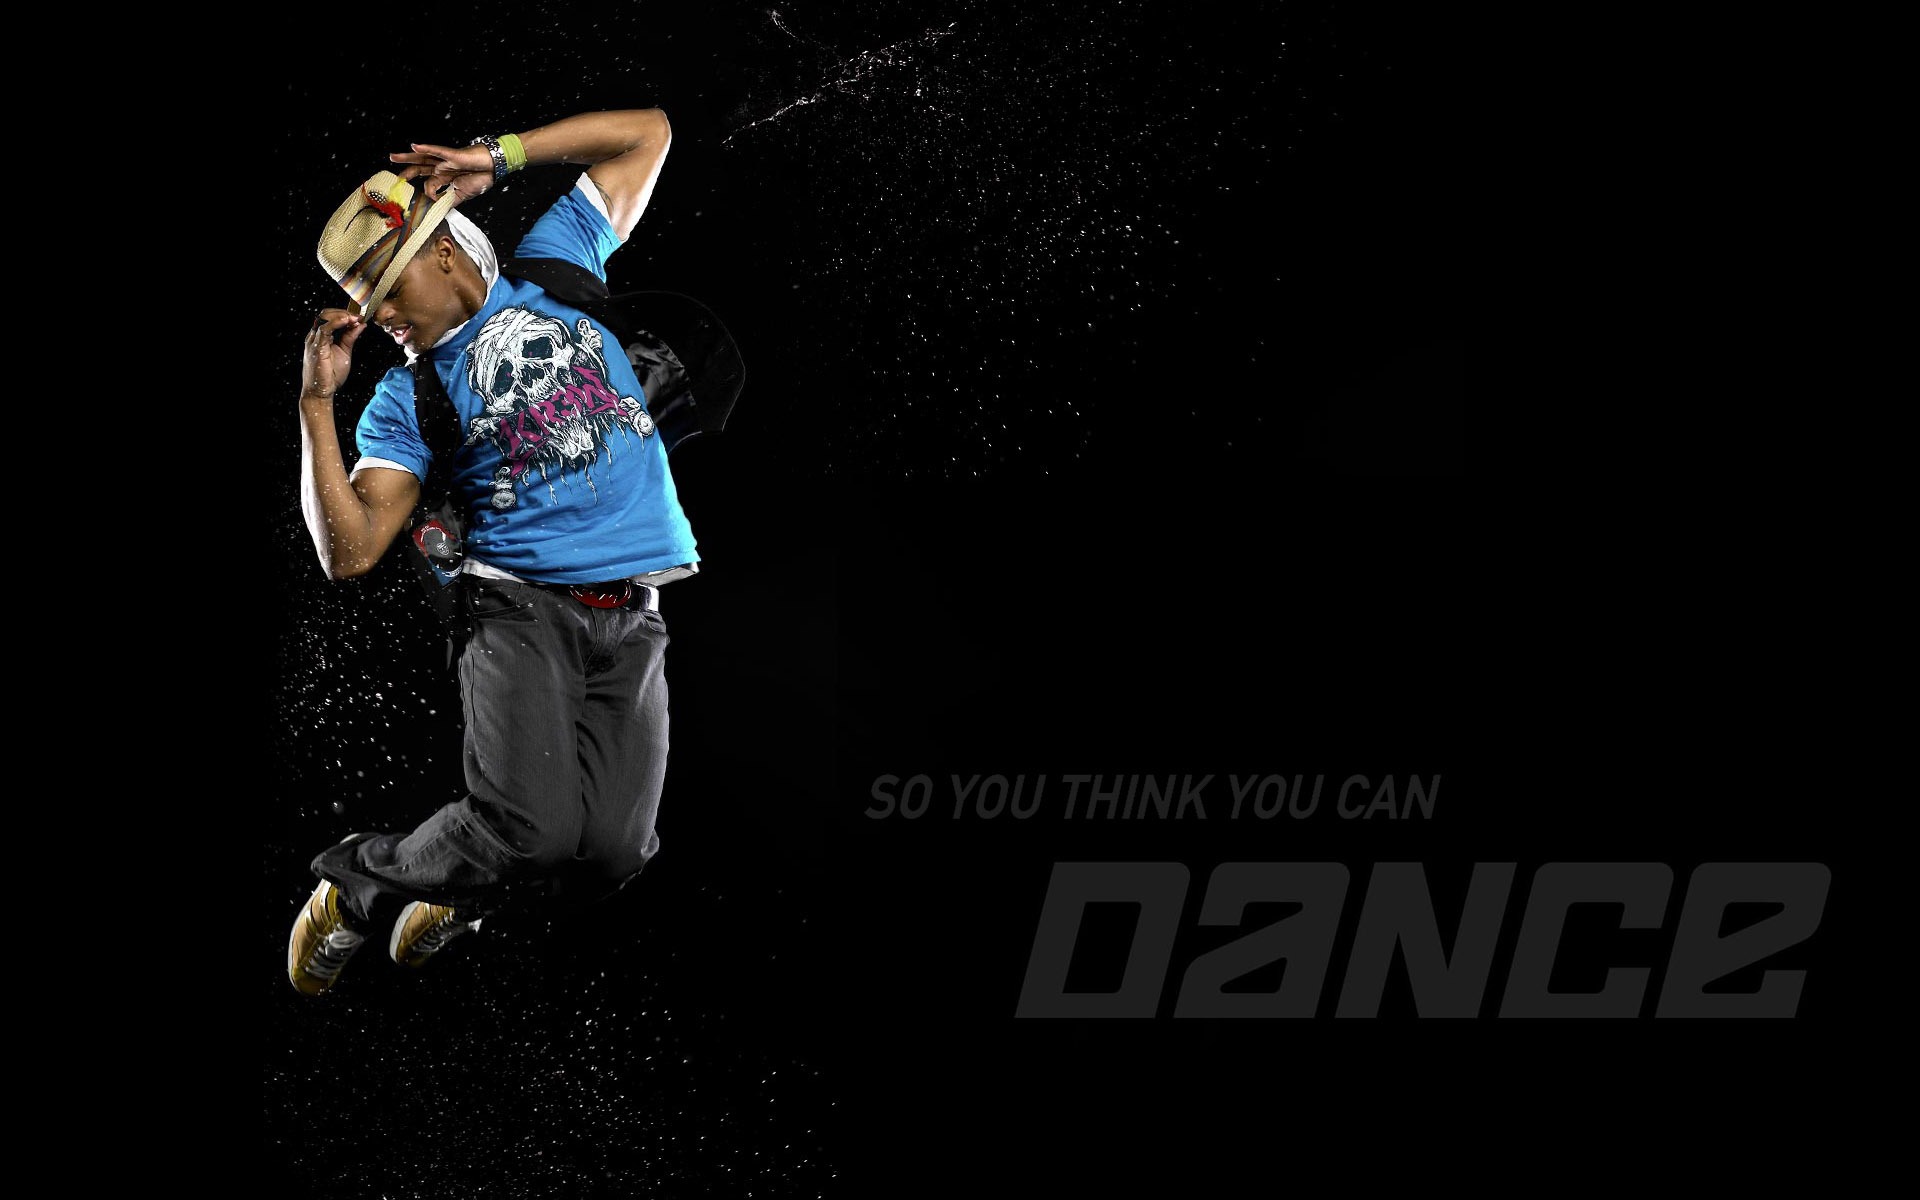 So You Think You Can Dance wallpaper (1) #20 - 1920x1200